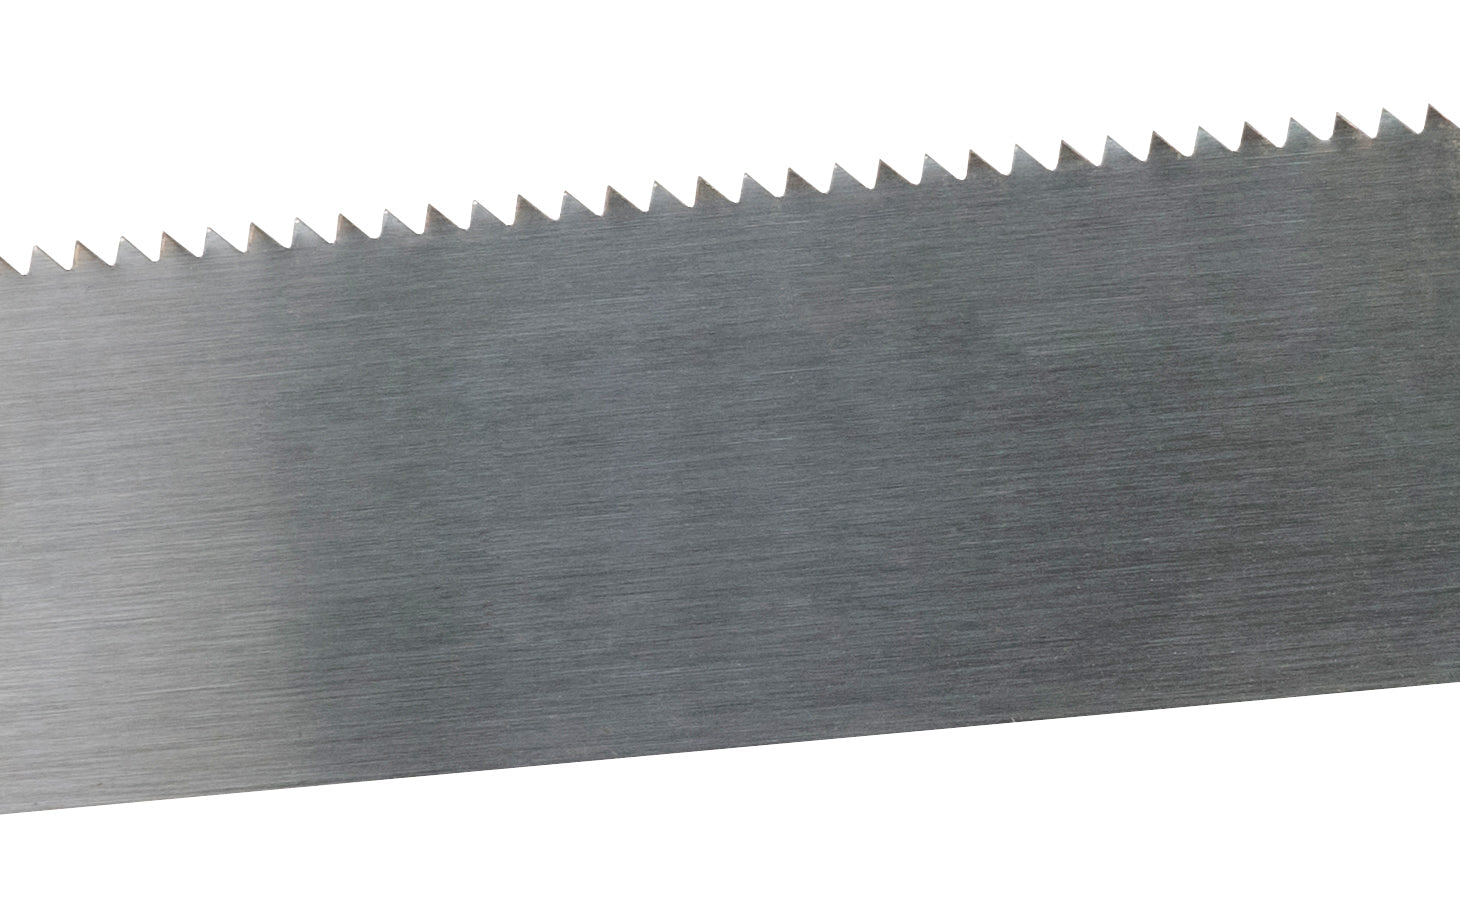 Ulmia Frame Saw Blade 9 TPI 600 mm Blade. A replacement saw blade made by Ulmia in Germany. Medium saw teeth with slight push-to-cut orientation for fine & precise cuts, cross cutting tenons & sawing dovetail tenons. Replacement blade for Ulmia web saw. Made in Germany.